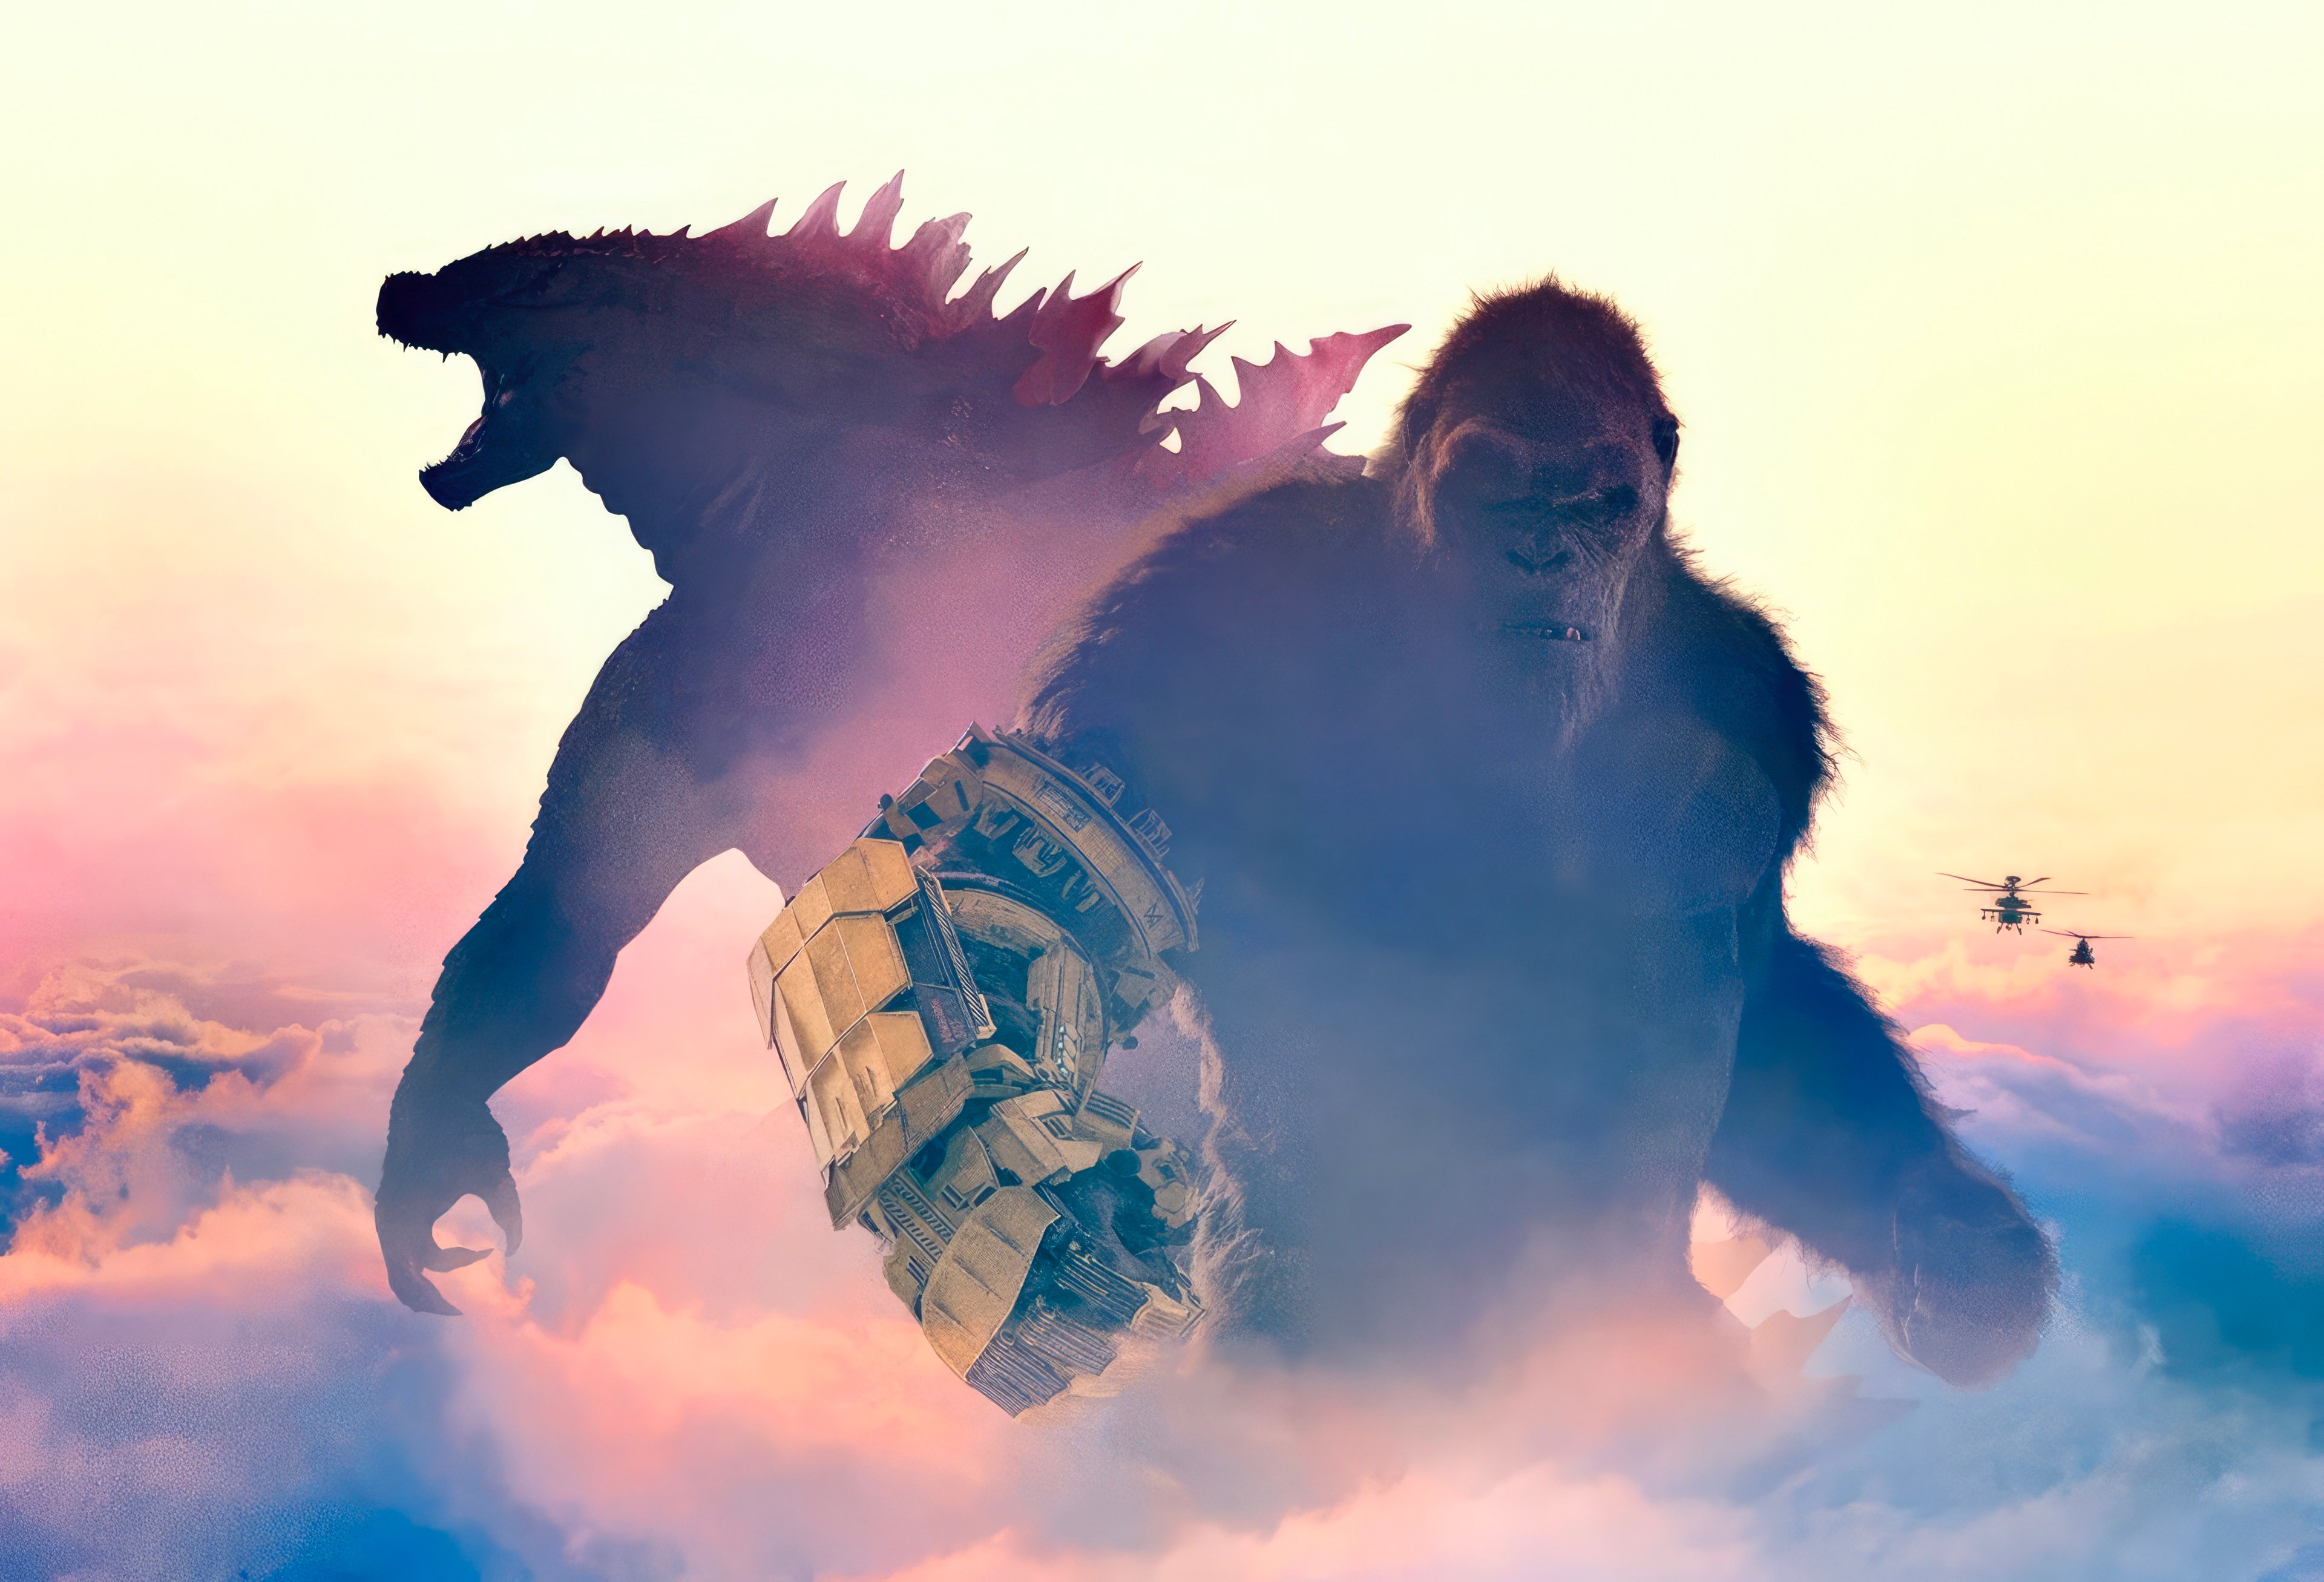 Godzilla x Kong movie wallpaper Resolution 3840x2614 | Best Download this awesome wallpaper - Cool Wallpaper HD - CoolWallpaper-HD.com